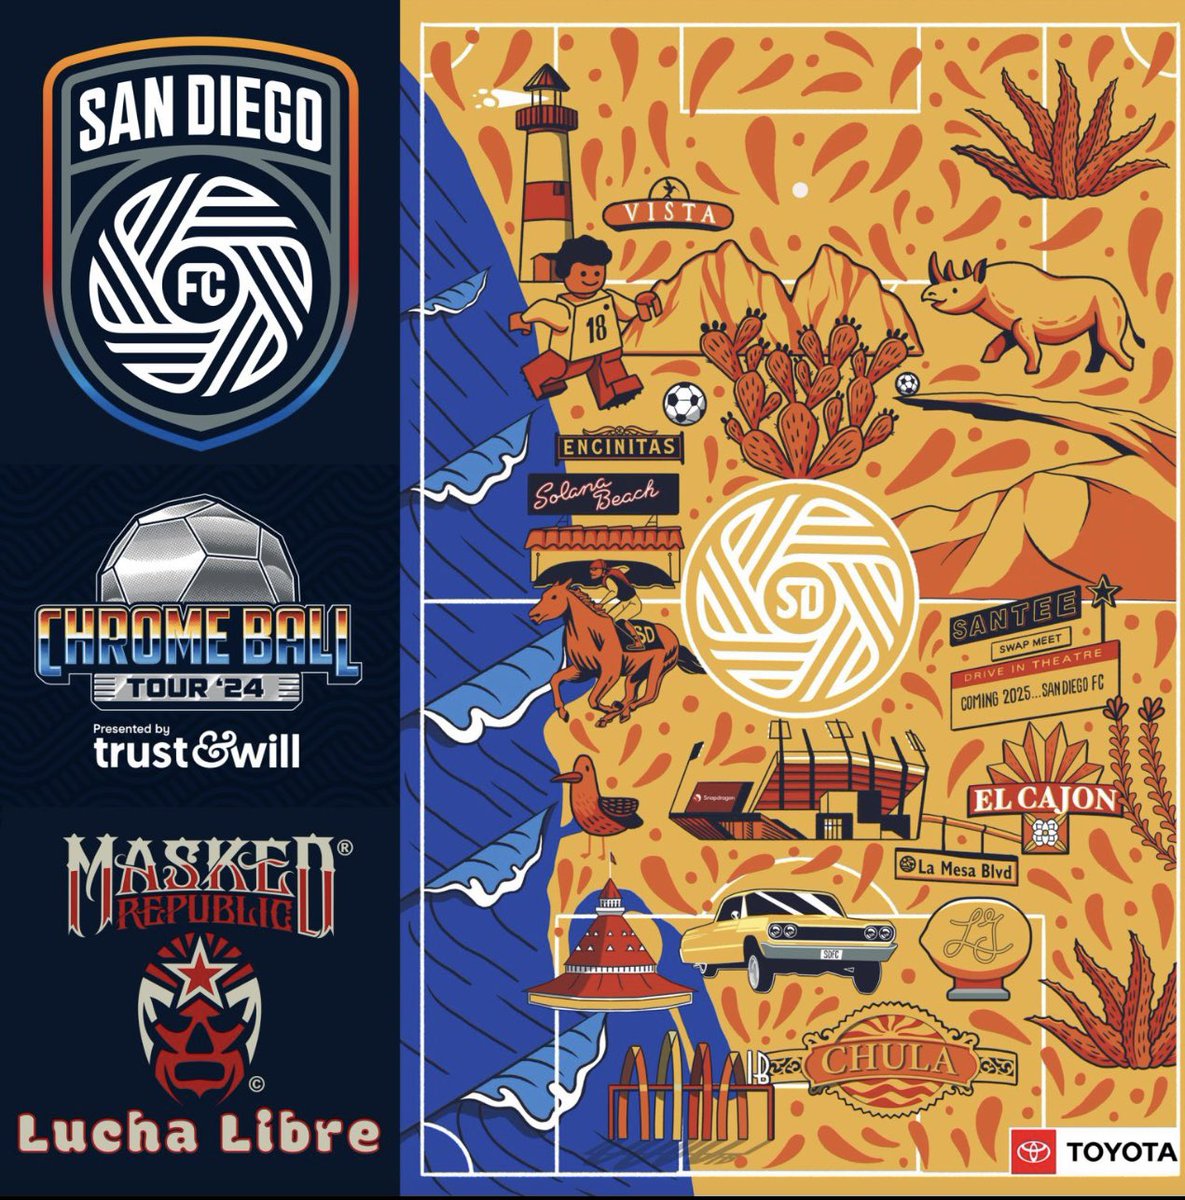 THIS SATURDAY in our hometown of San Diego - and even more specific our hometown of Chula Vista - we are honored to join @sandiegofc as we get ready for @MLS action in 2025! Come see some of San Diego & Tijuana’s best luchadores at the #ChromeBallTour